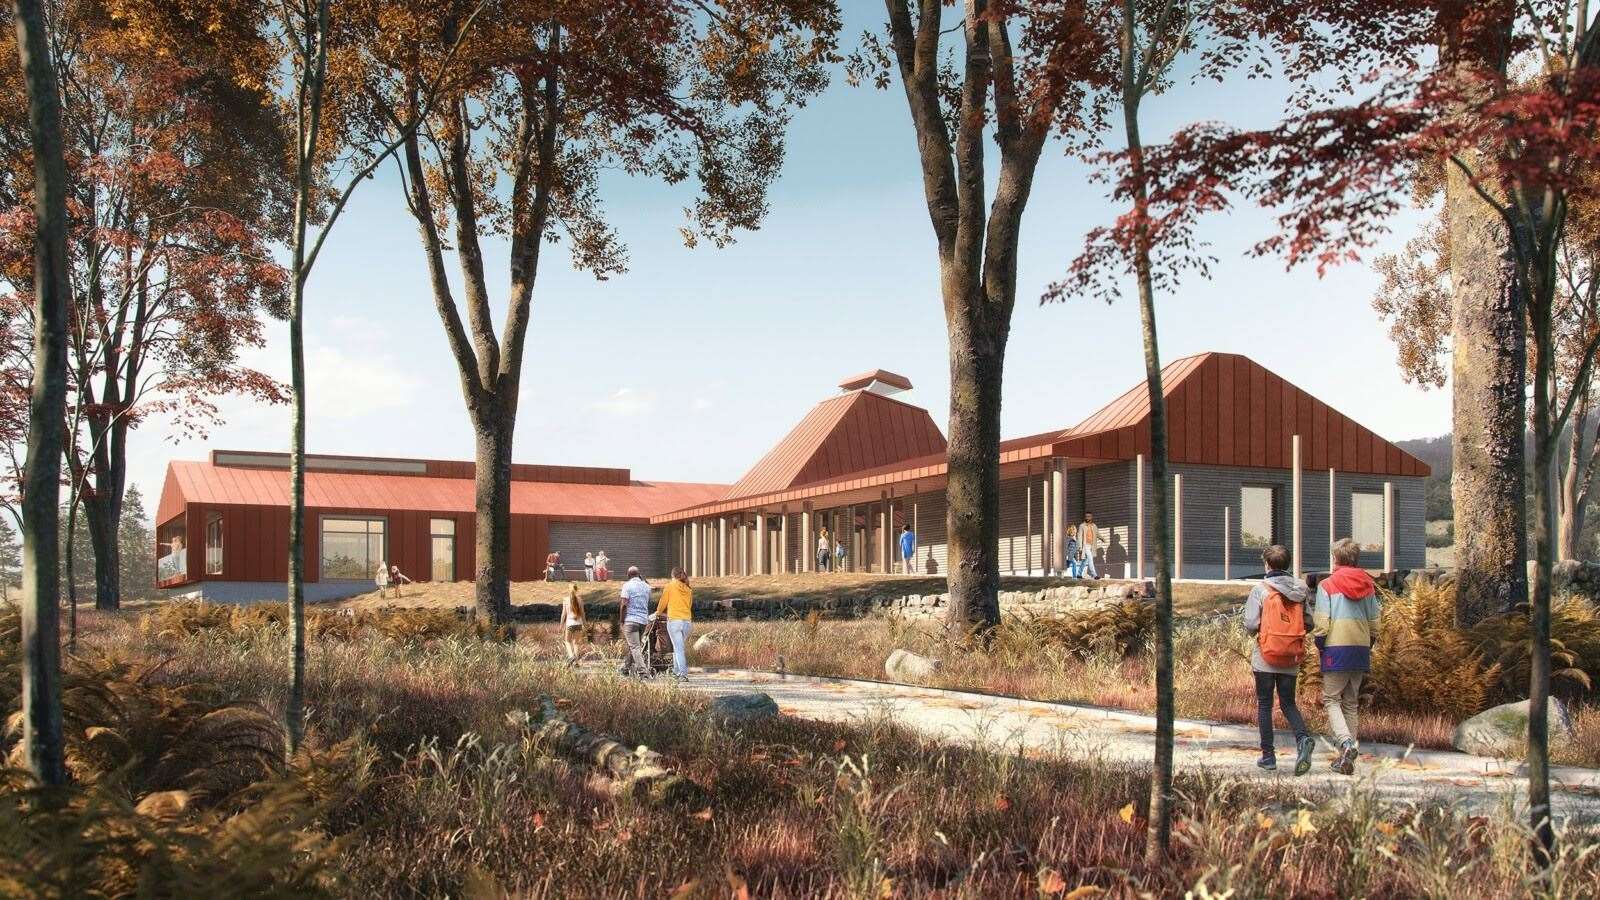 An artist's impression of how the Dundreggan Rewilding Centre might look. Picture: Threesixty-Architecture.